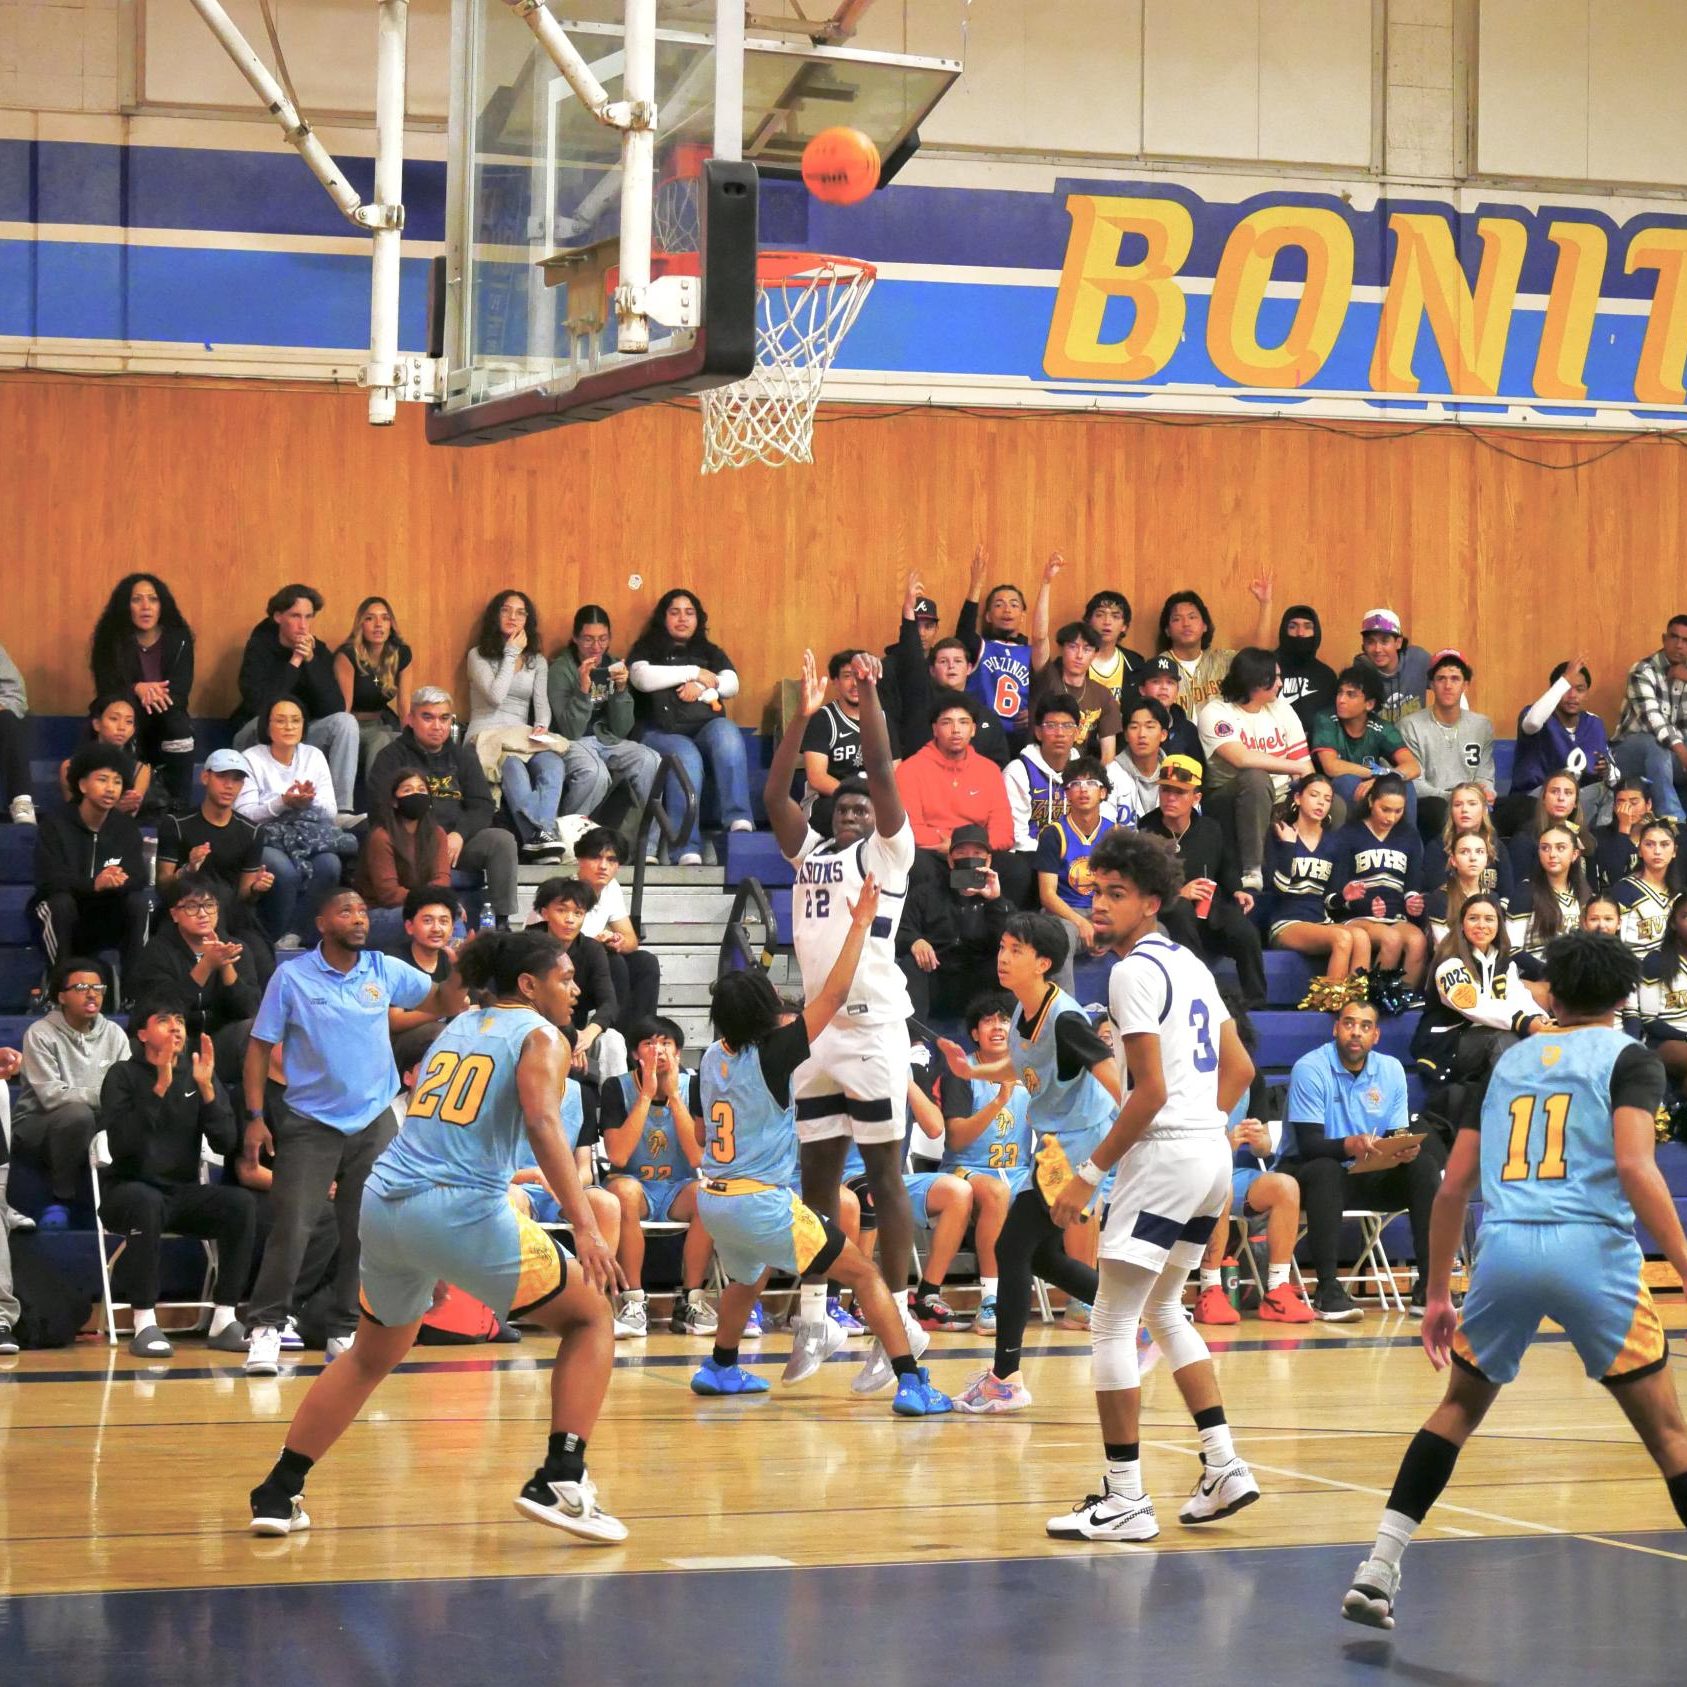 On Jan. 19, the Bonita Vista High (BVH) Barons boys’ varsity basketball team outplayed their league rivals the San Ysidro High (SYH) Cougars in a 70-51 victory. Early in the game, BVH power forward and Junior Aaron Owens (22) shoots a three pointer from far out to tie the score.